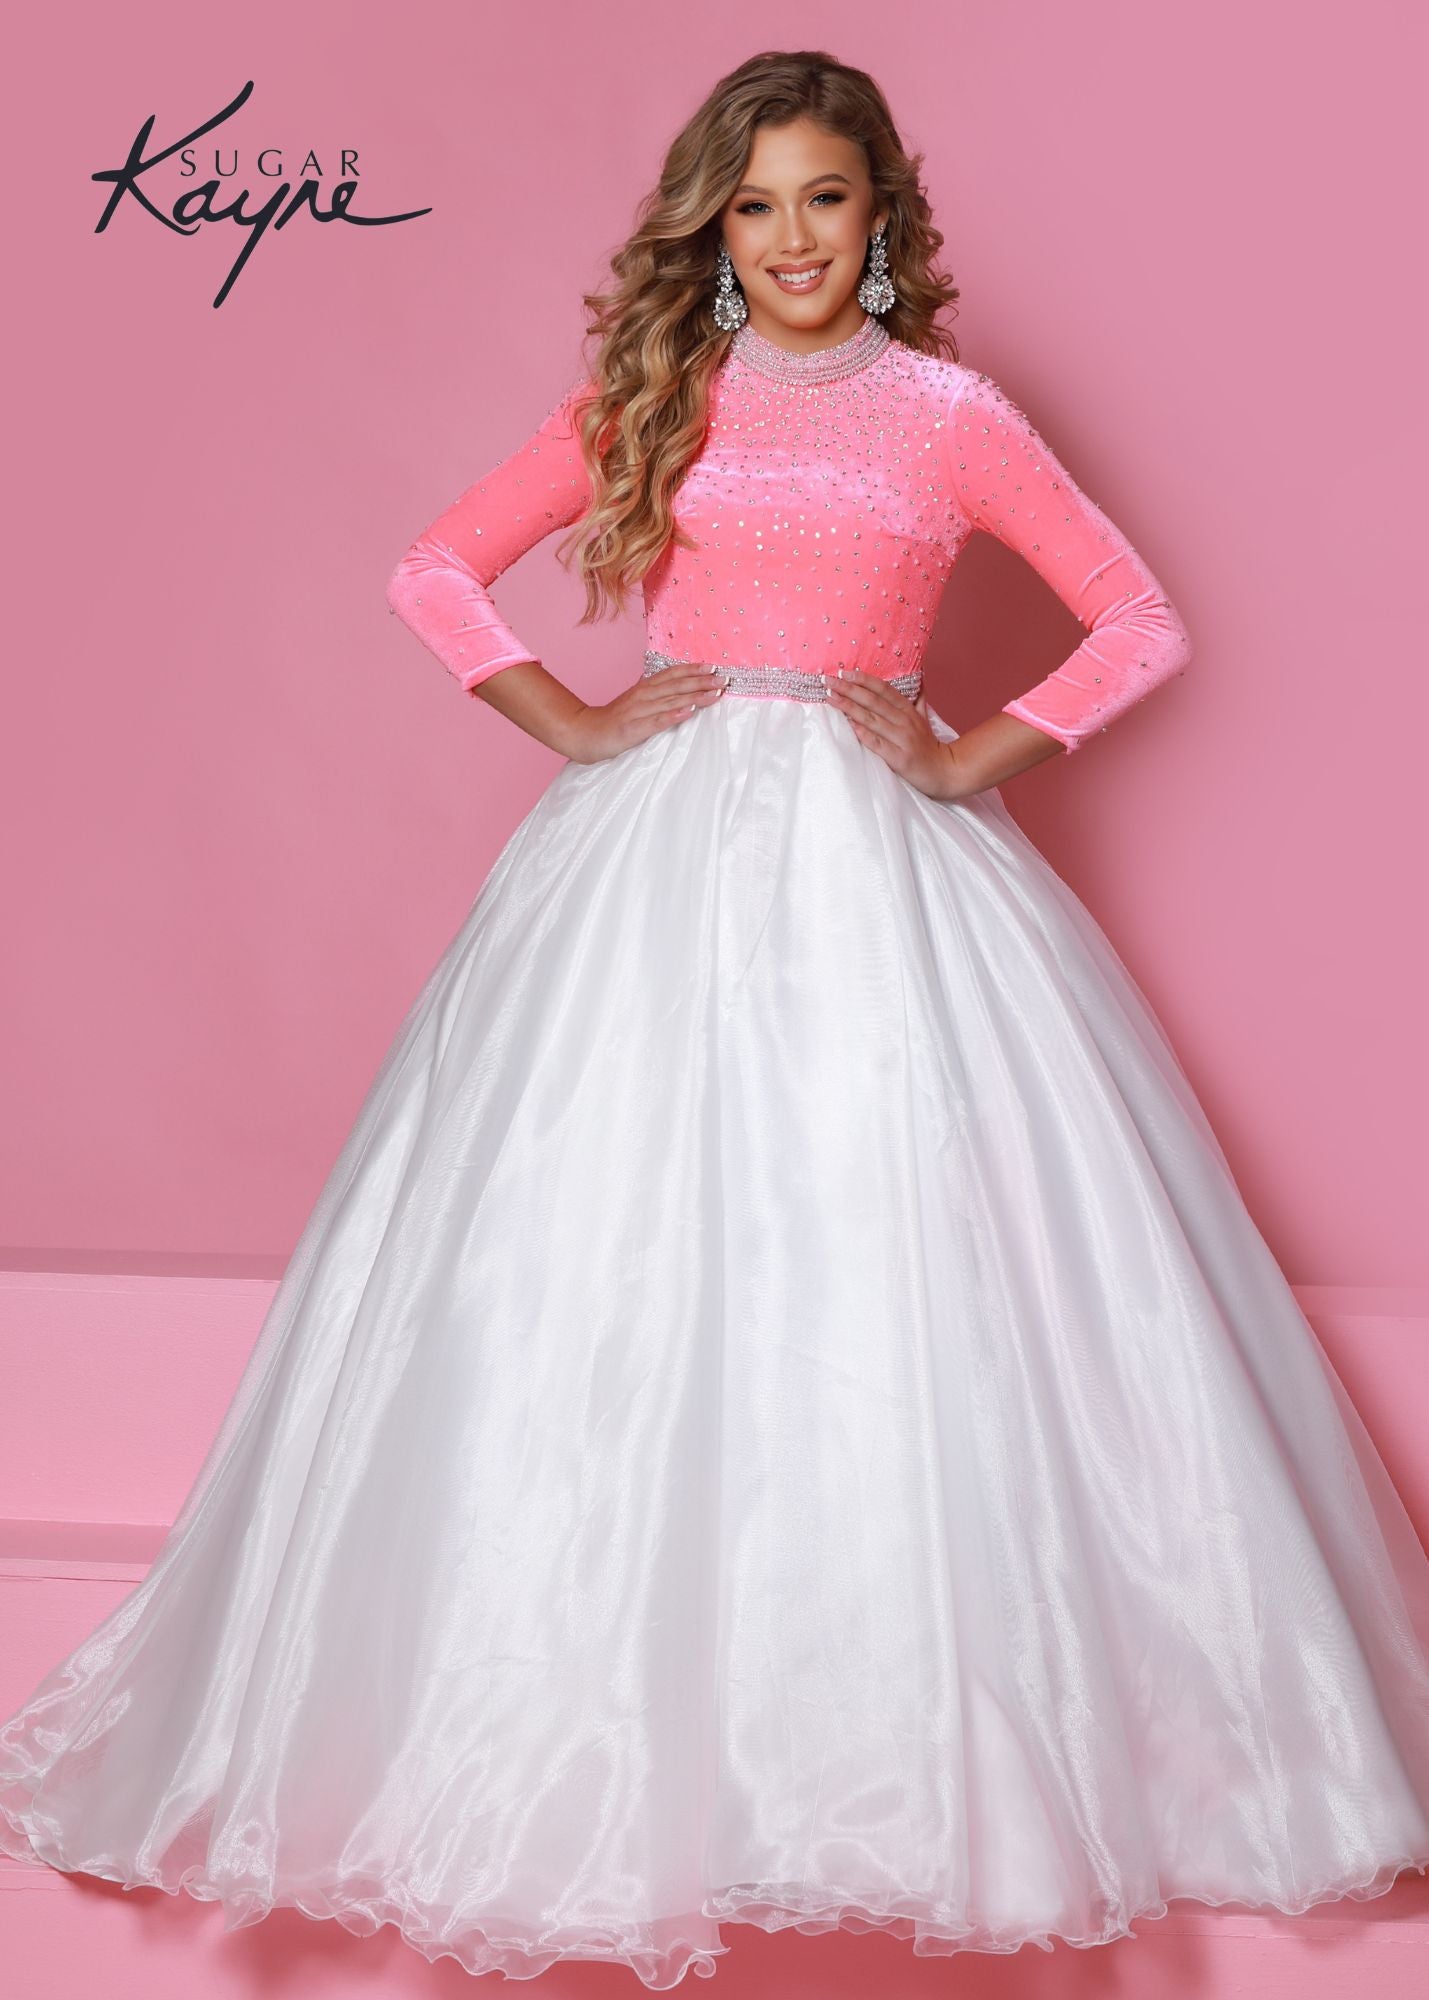 Sugar Kayne C306 Girls Long Sleeve Velvet Bodice Pageant Dress A Line Formal Gown Product Details Perfect in pearls. This long-sleeve color-blocked stretch velvet ballgown is the perfect addition to your closet for your next pageant! The collar and waistband are trimmed with rhinestone and pearls – OH MY!  Color Flamingo-White, Sky Blue-White  Size 2, 4, 6, 8, 10, 12, 14, 16  Fabric Stretch Velvet, Stretch Lining, Organza